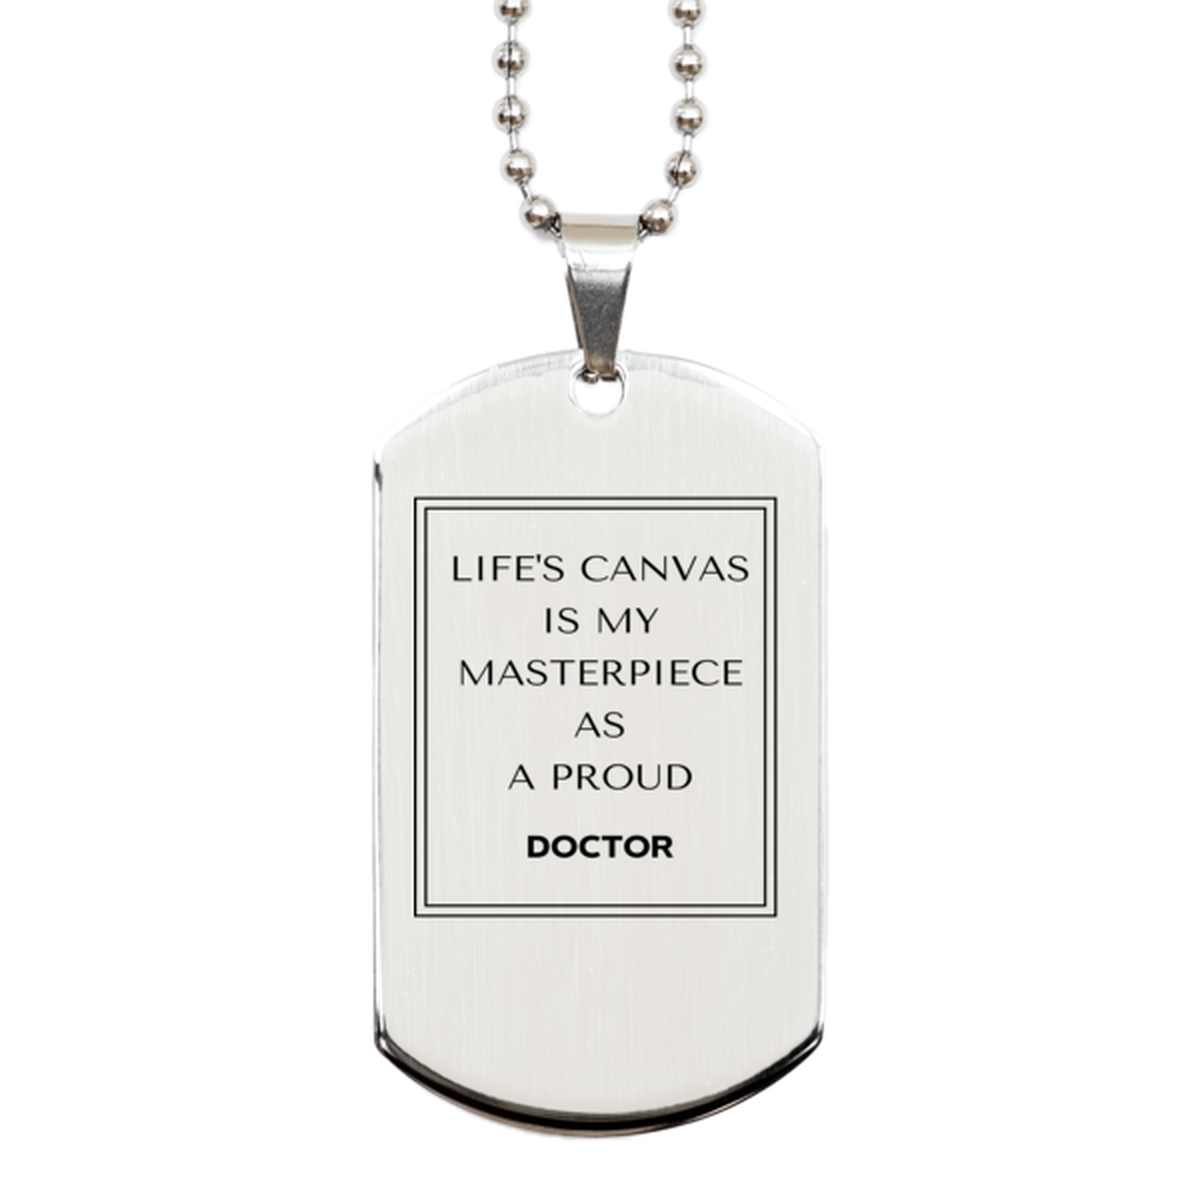 Proud Doctor Gifts, Life's canvas is my masterpiece, Epic Birthday Christmas Unique Silver Dog Tag For Doctor, Coworkers, Men, Women, Friends